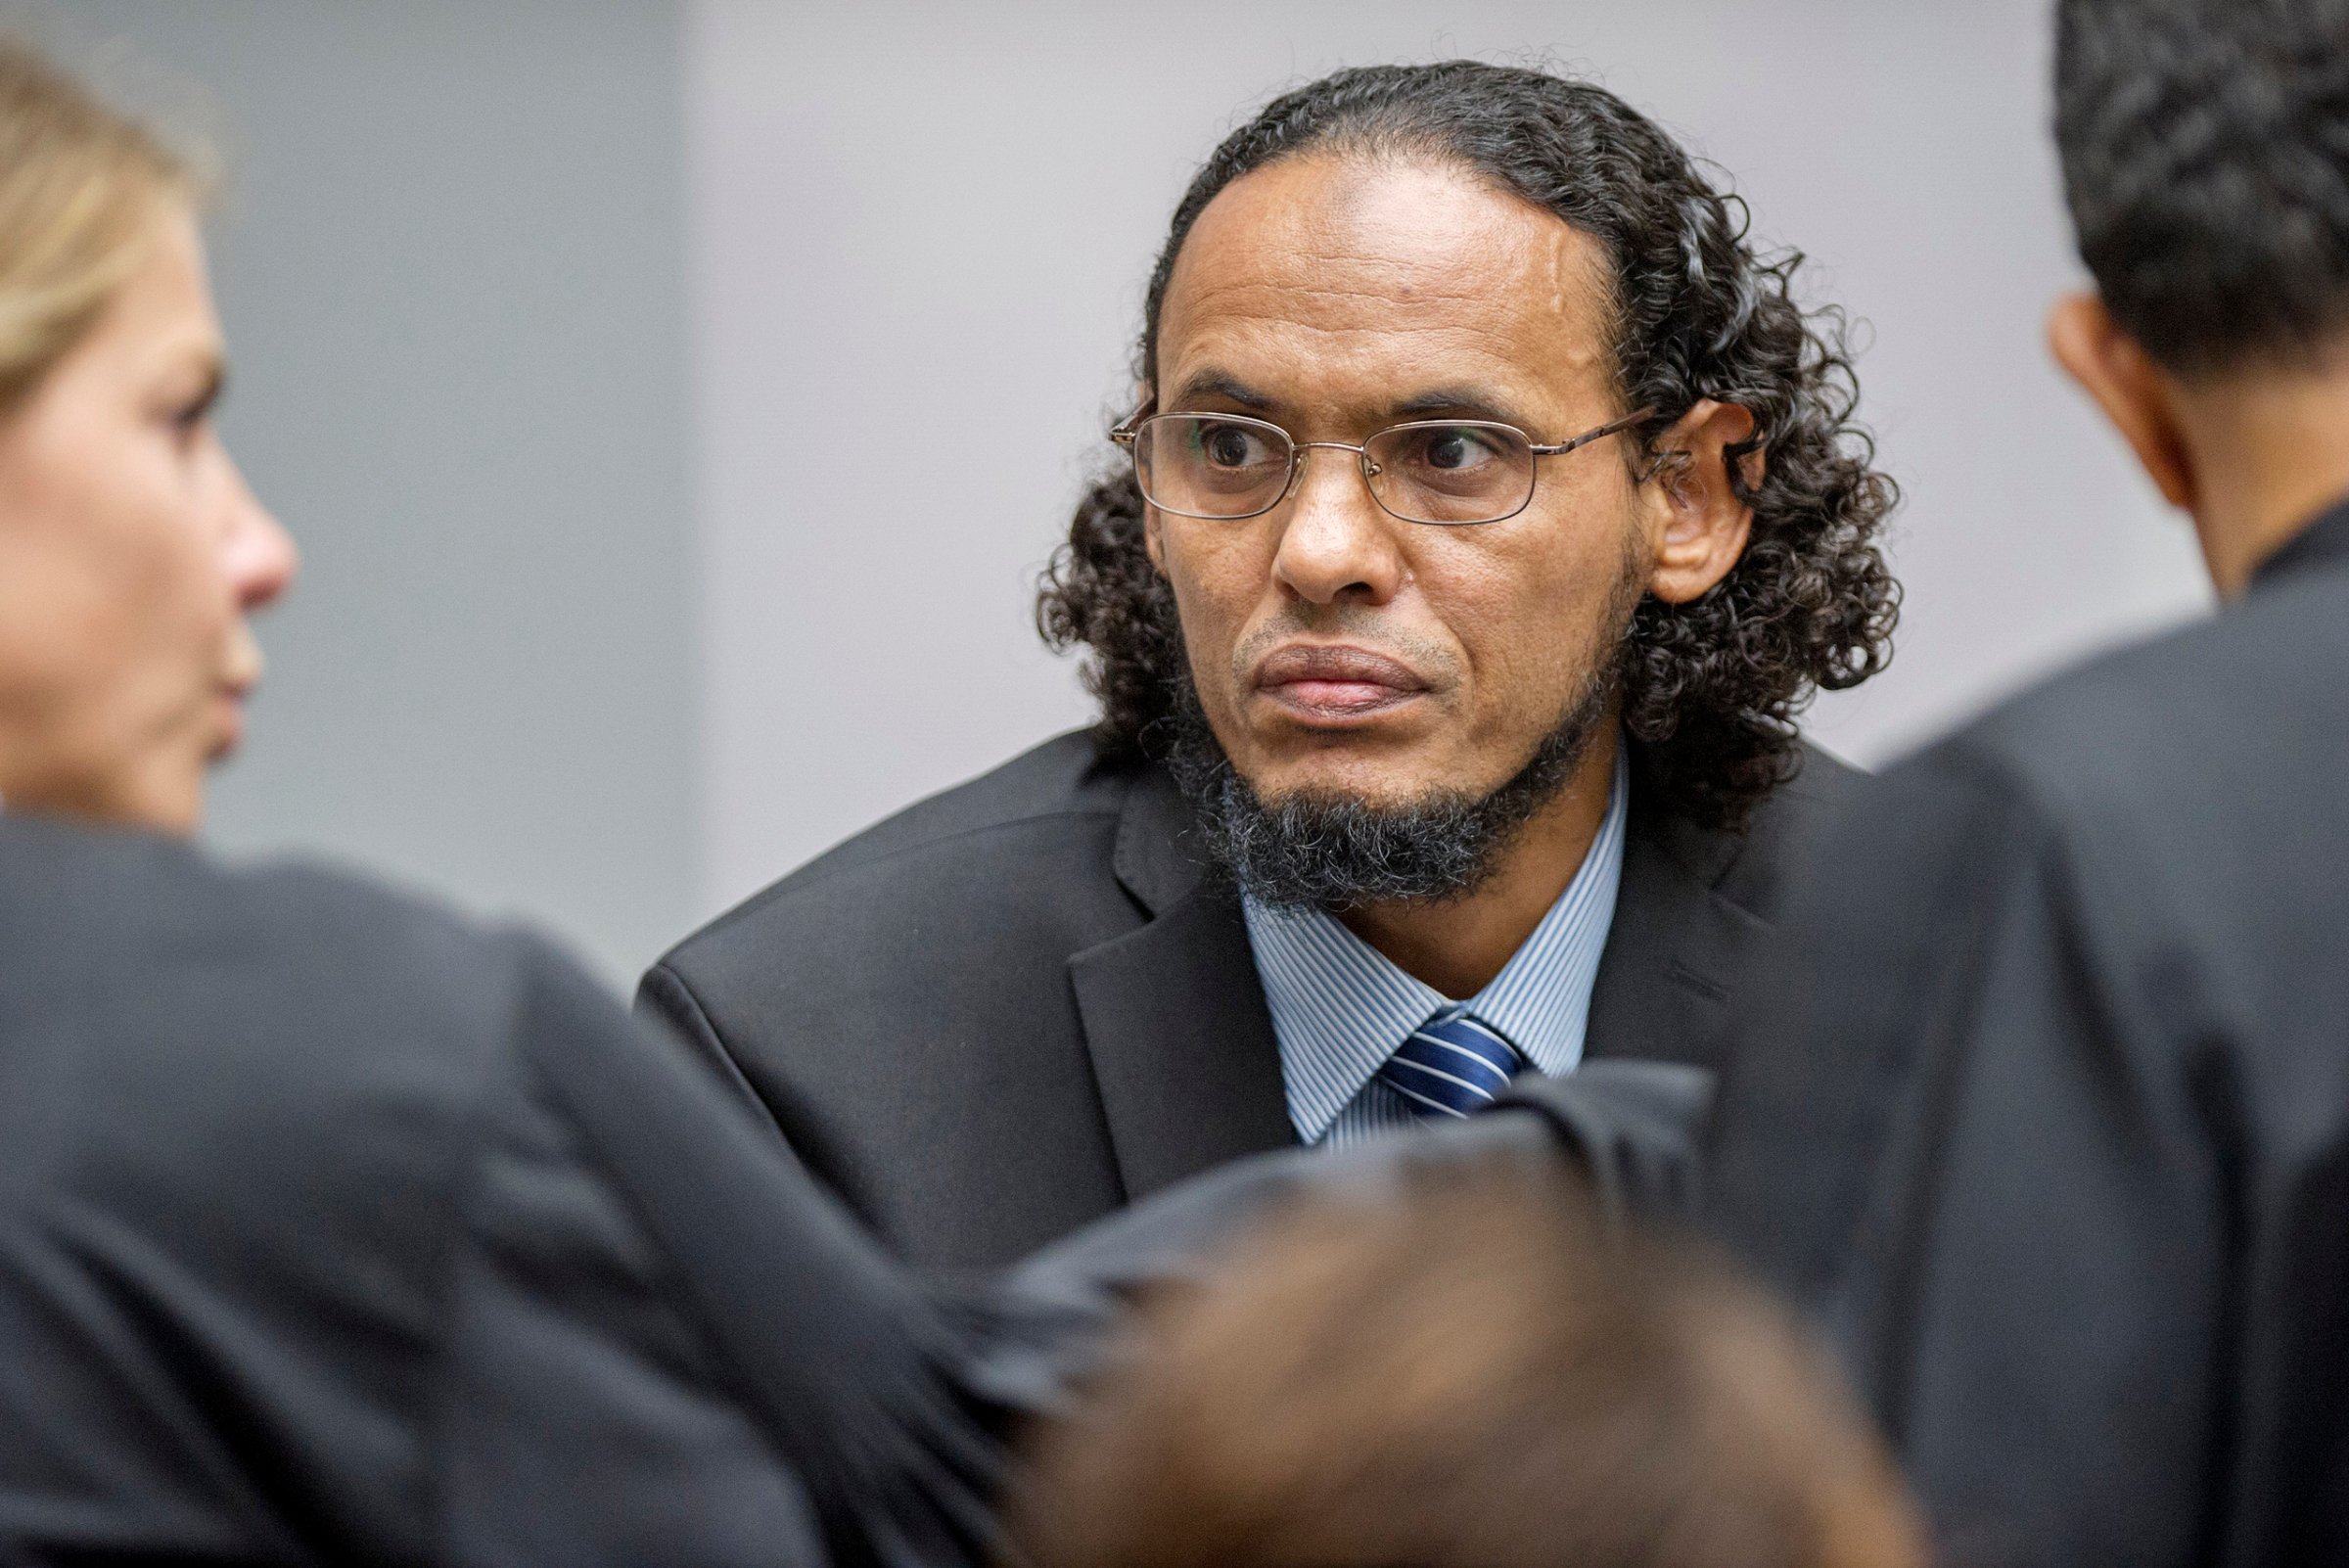 Ahmad Al Faqi Al Mahdi, center, appears at the International Criminal Court in The Hague, Netherlands, on Aug. 22, 2016, at the start of his trial on charges of involvement in the destruction of historic mausoleums in the Malian desert city of Timbuktu.